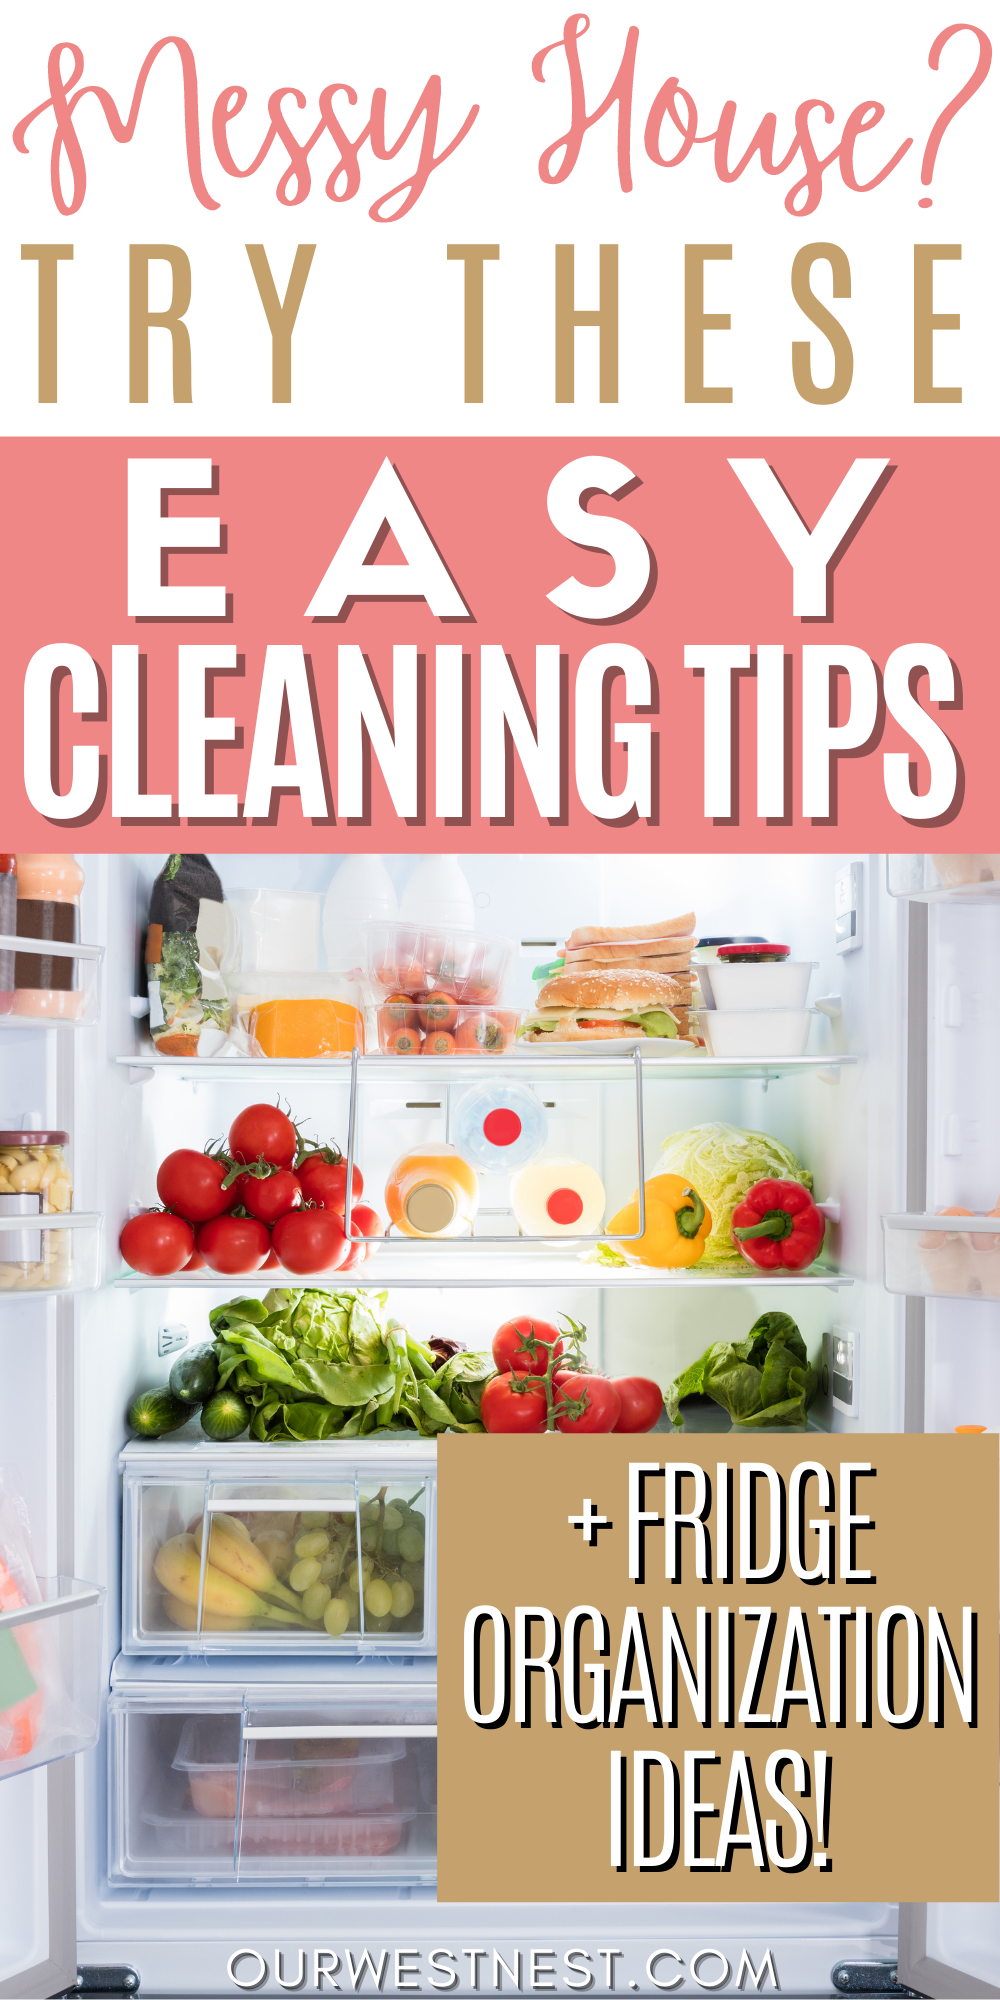 Spring Cleaning: How to Clean and Organize Your Refrigerator